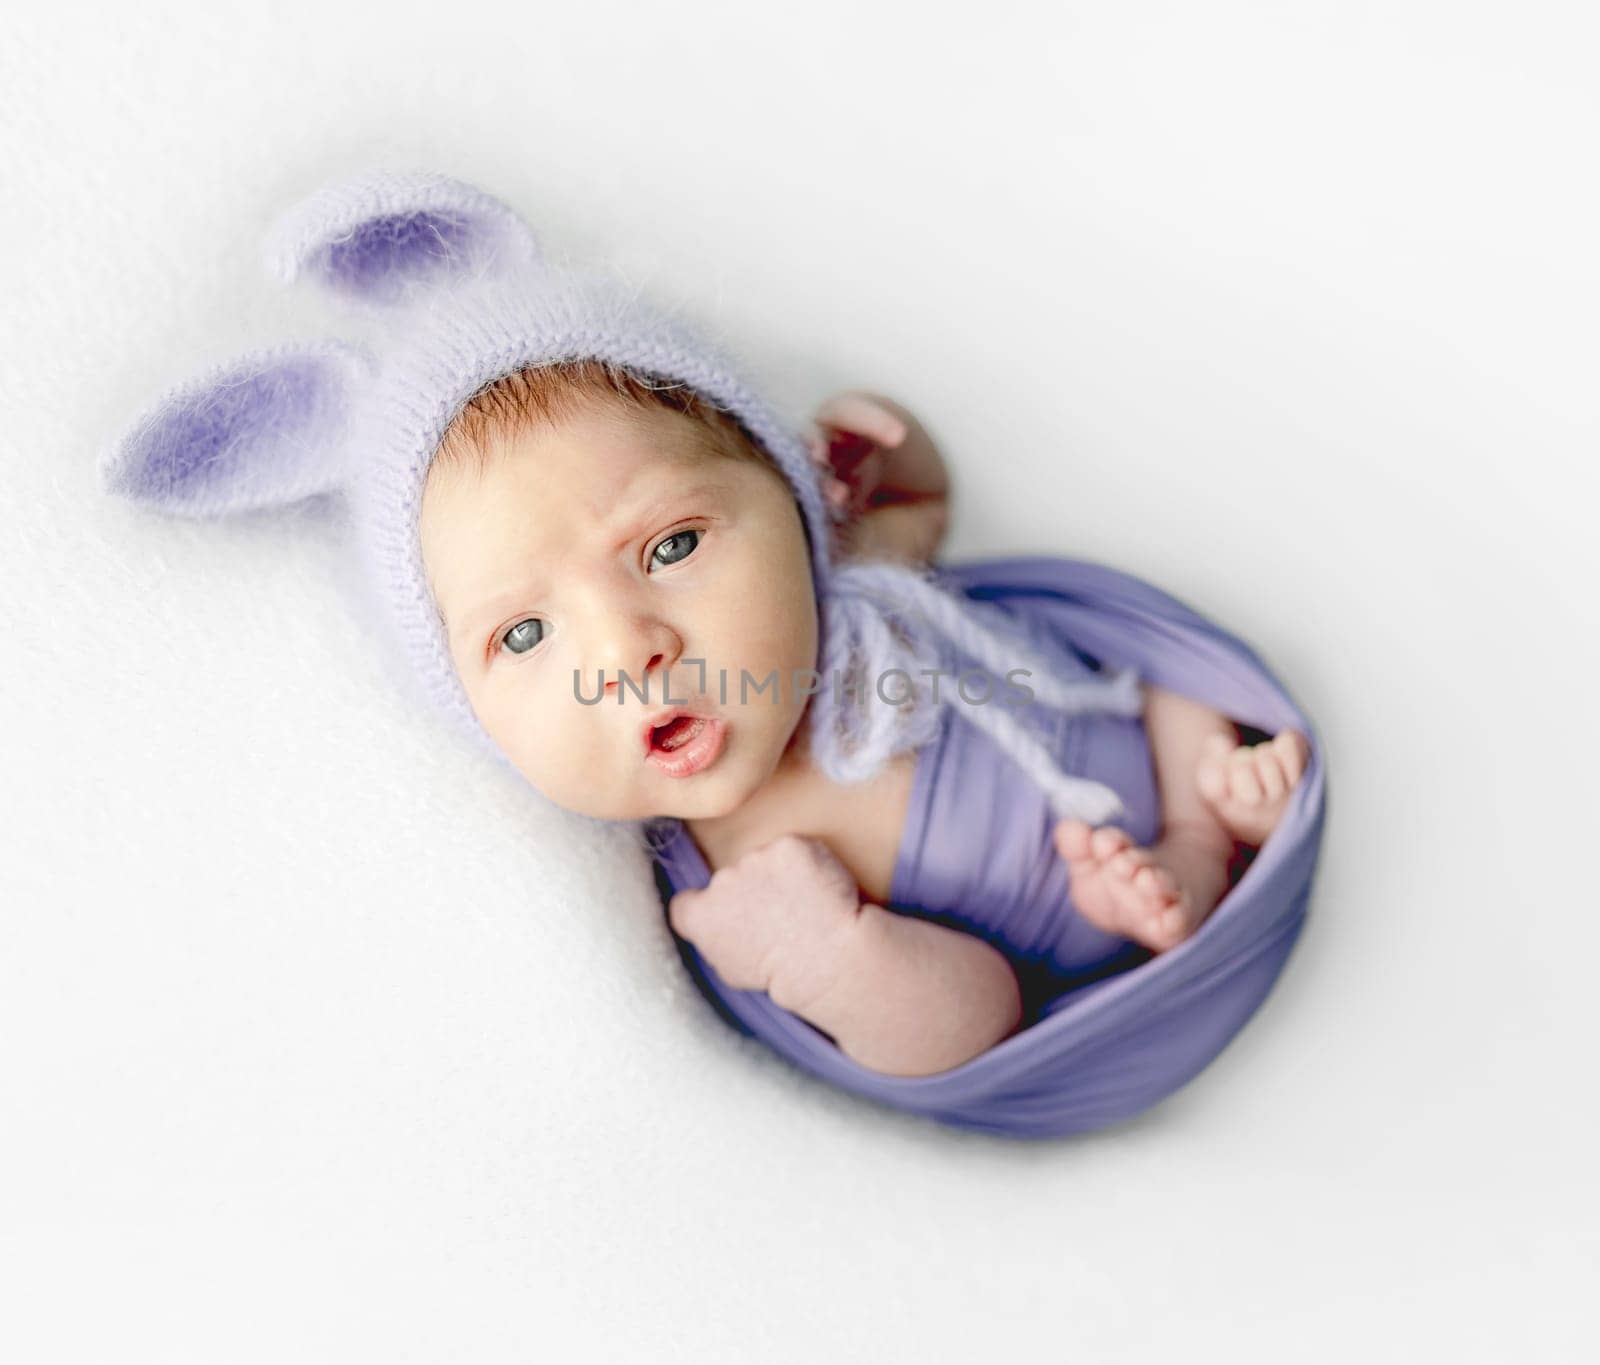 Newborn baby girl with beautiful blue eyes wearing knitted hat with banny ears studio portrait.